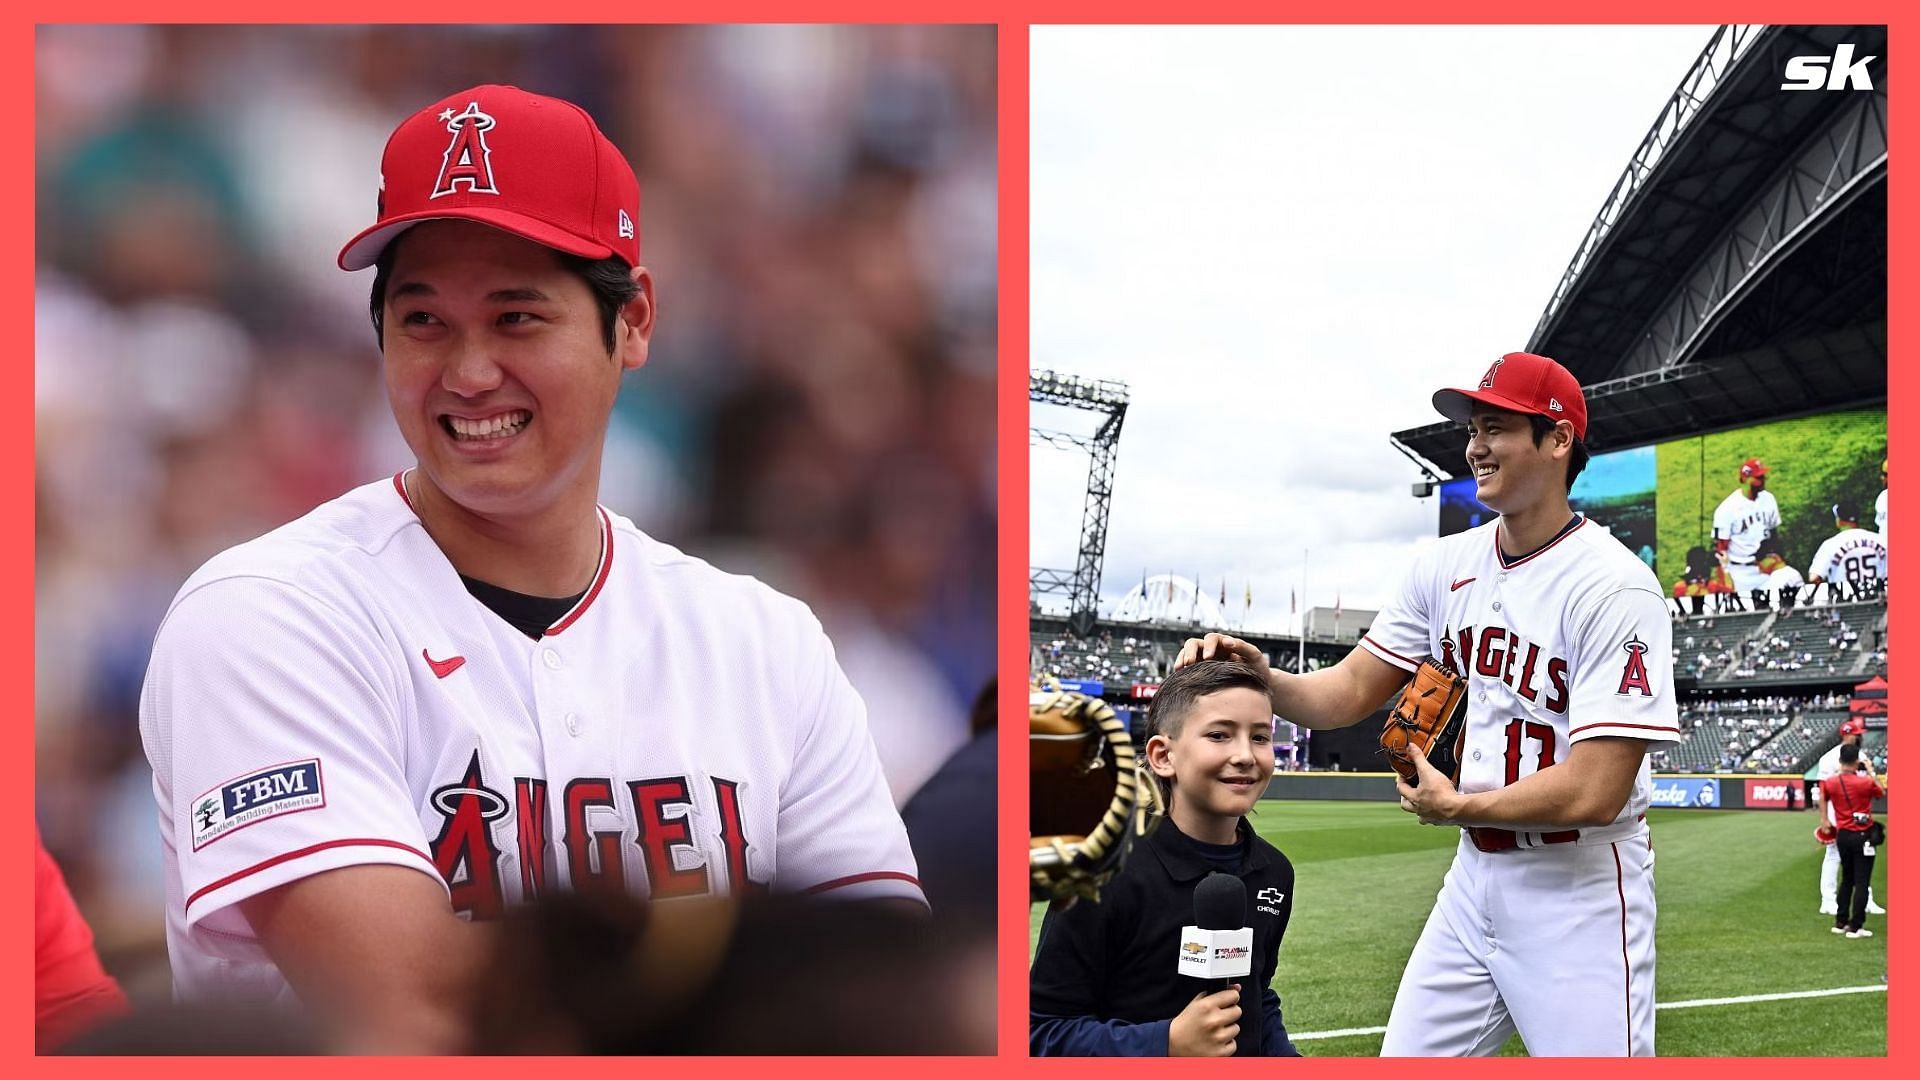 Angels' Shohei Ohtani gets free agency pitch from Mariners fans at All-Star  Game